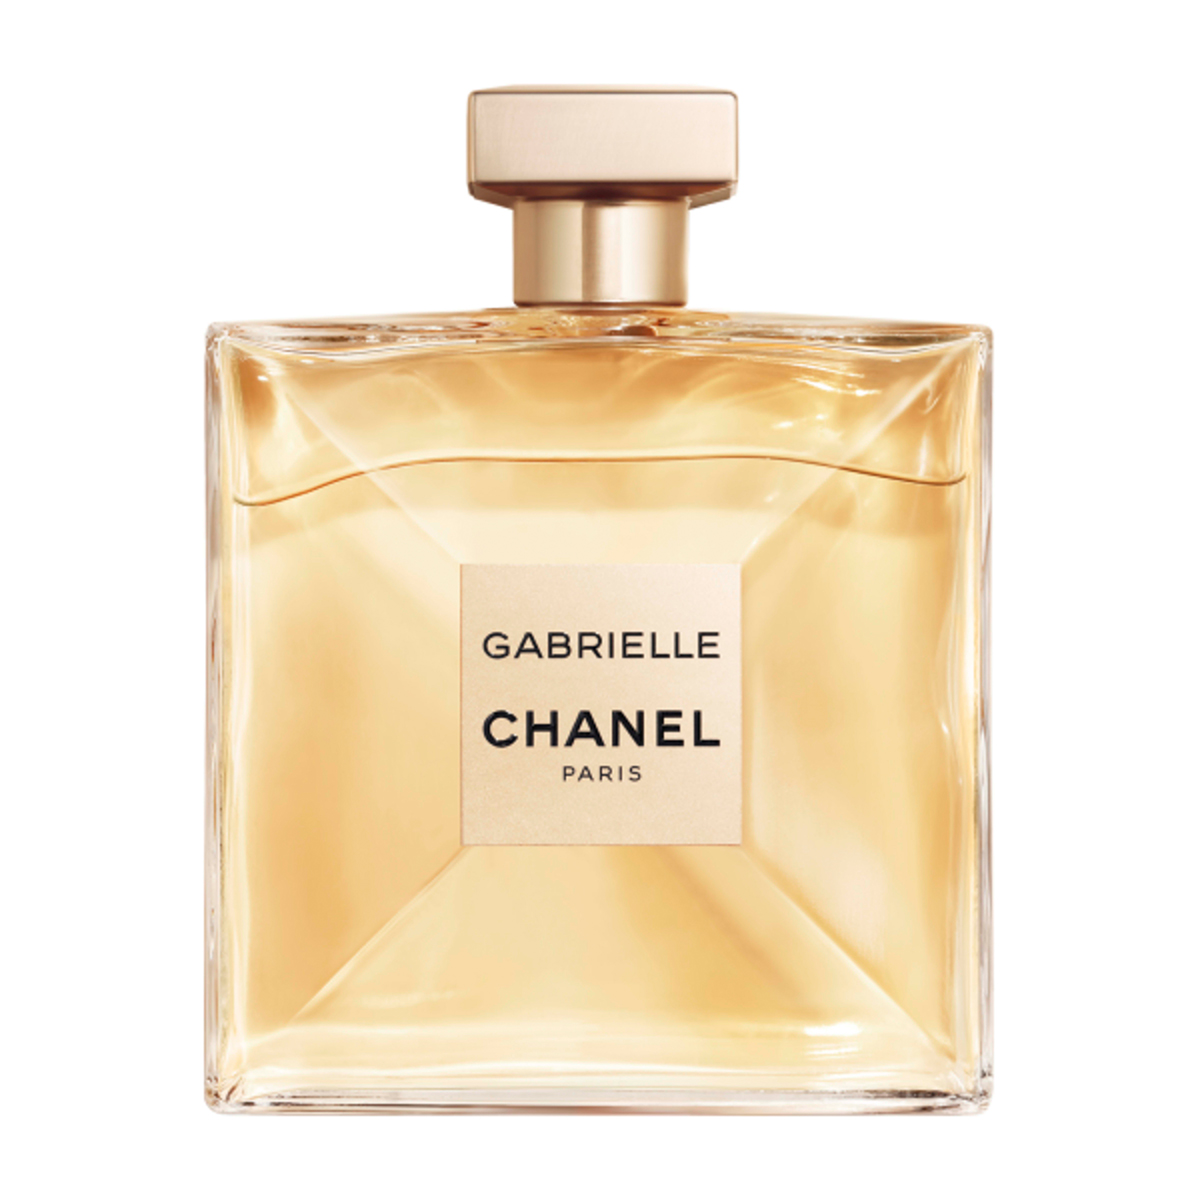 The Top 5 Best Chanel Perfumes of All Time | Who What Wear